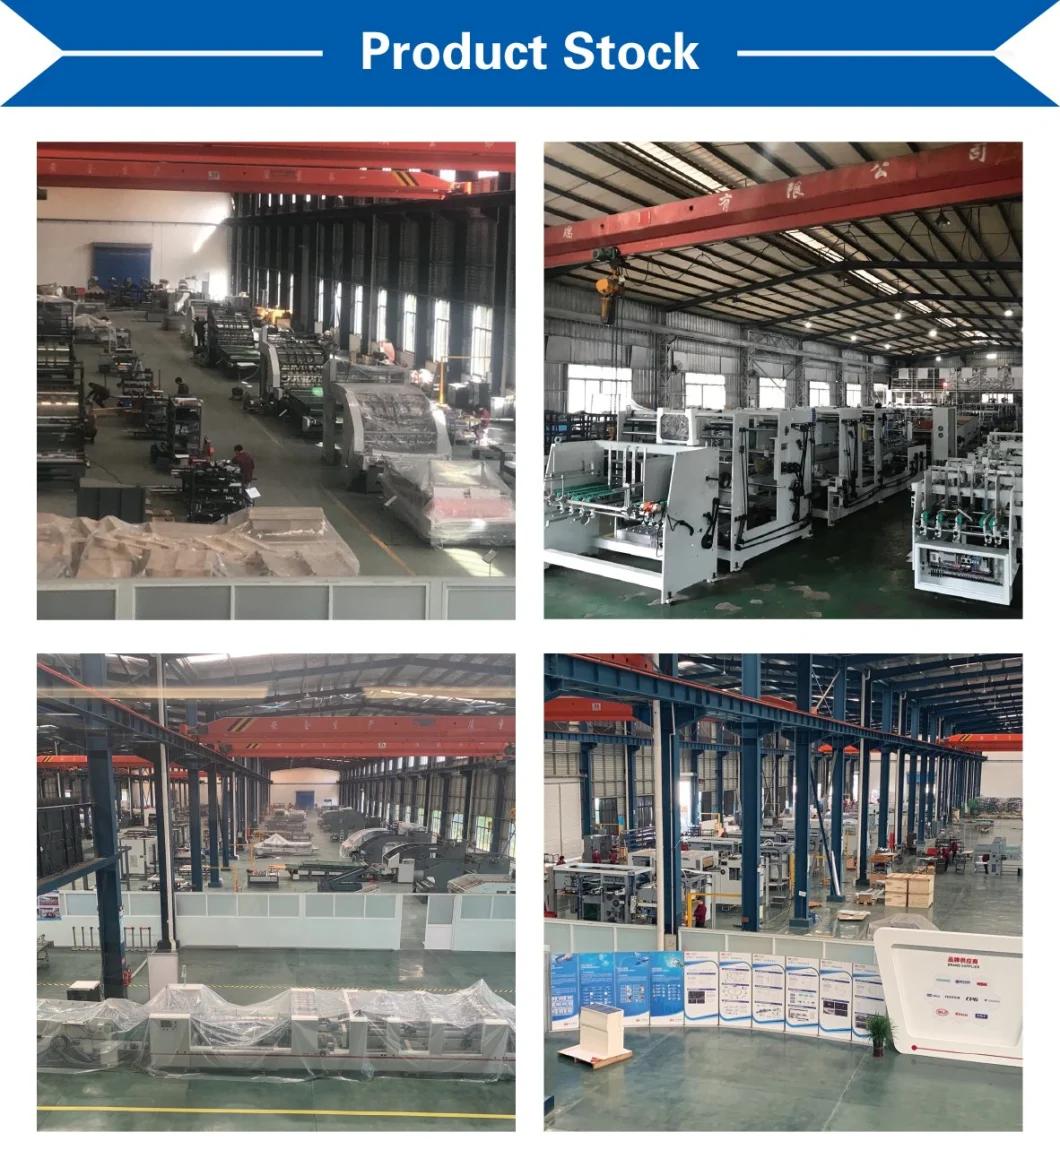 High Tech Factory Automatic Foil Stamping and Cutting Machine for Daily Necessities, Paper, Leather, Cotton Cloth, etc